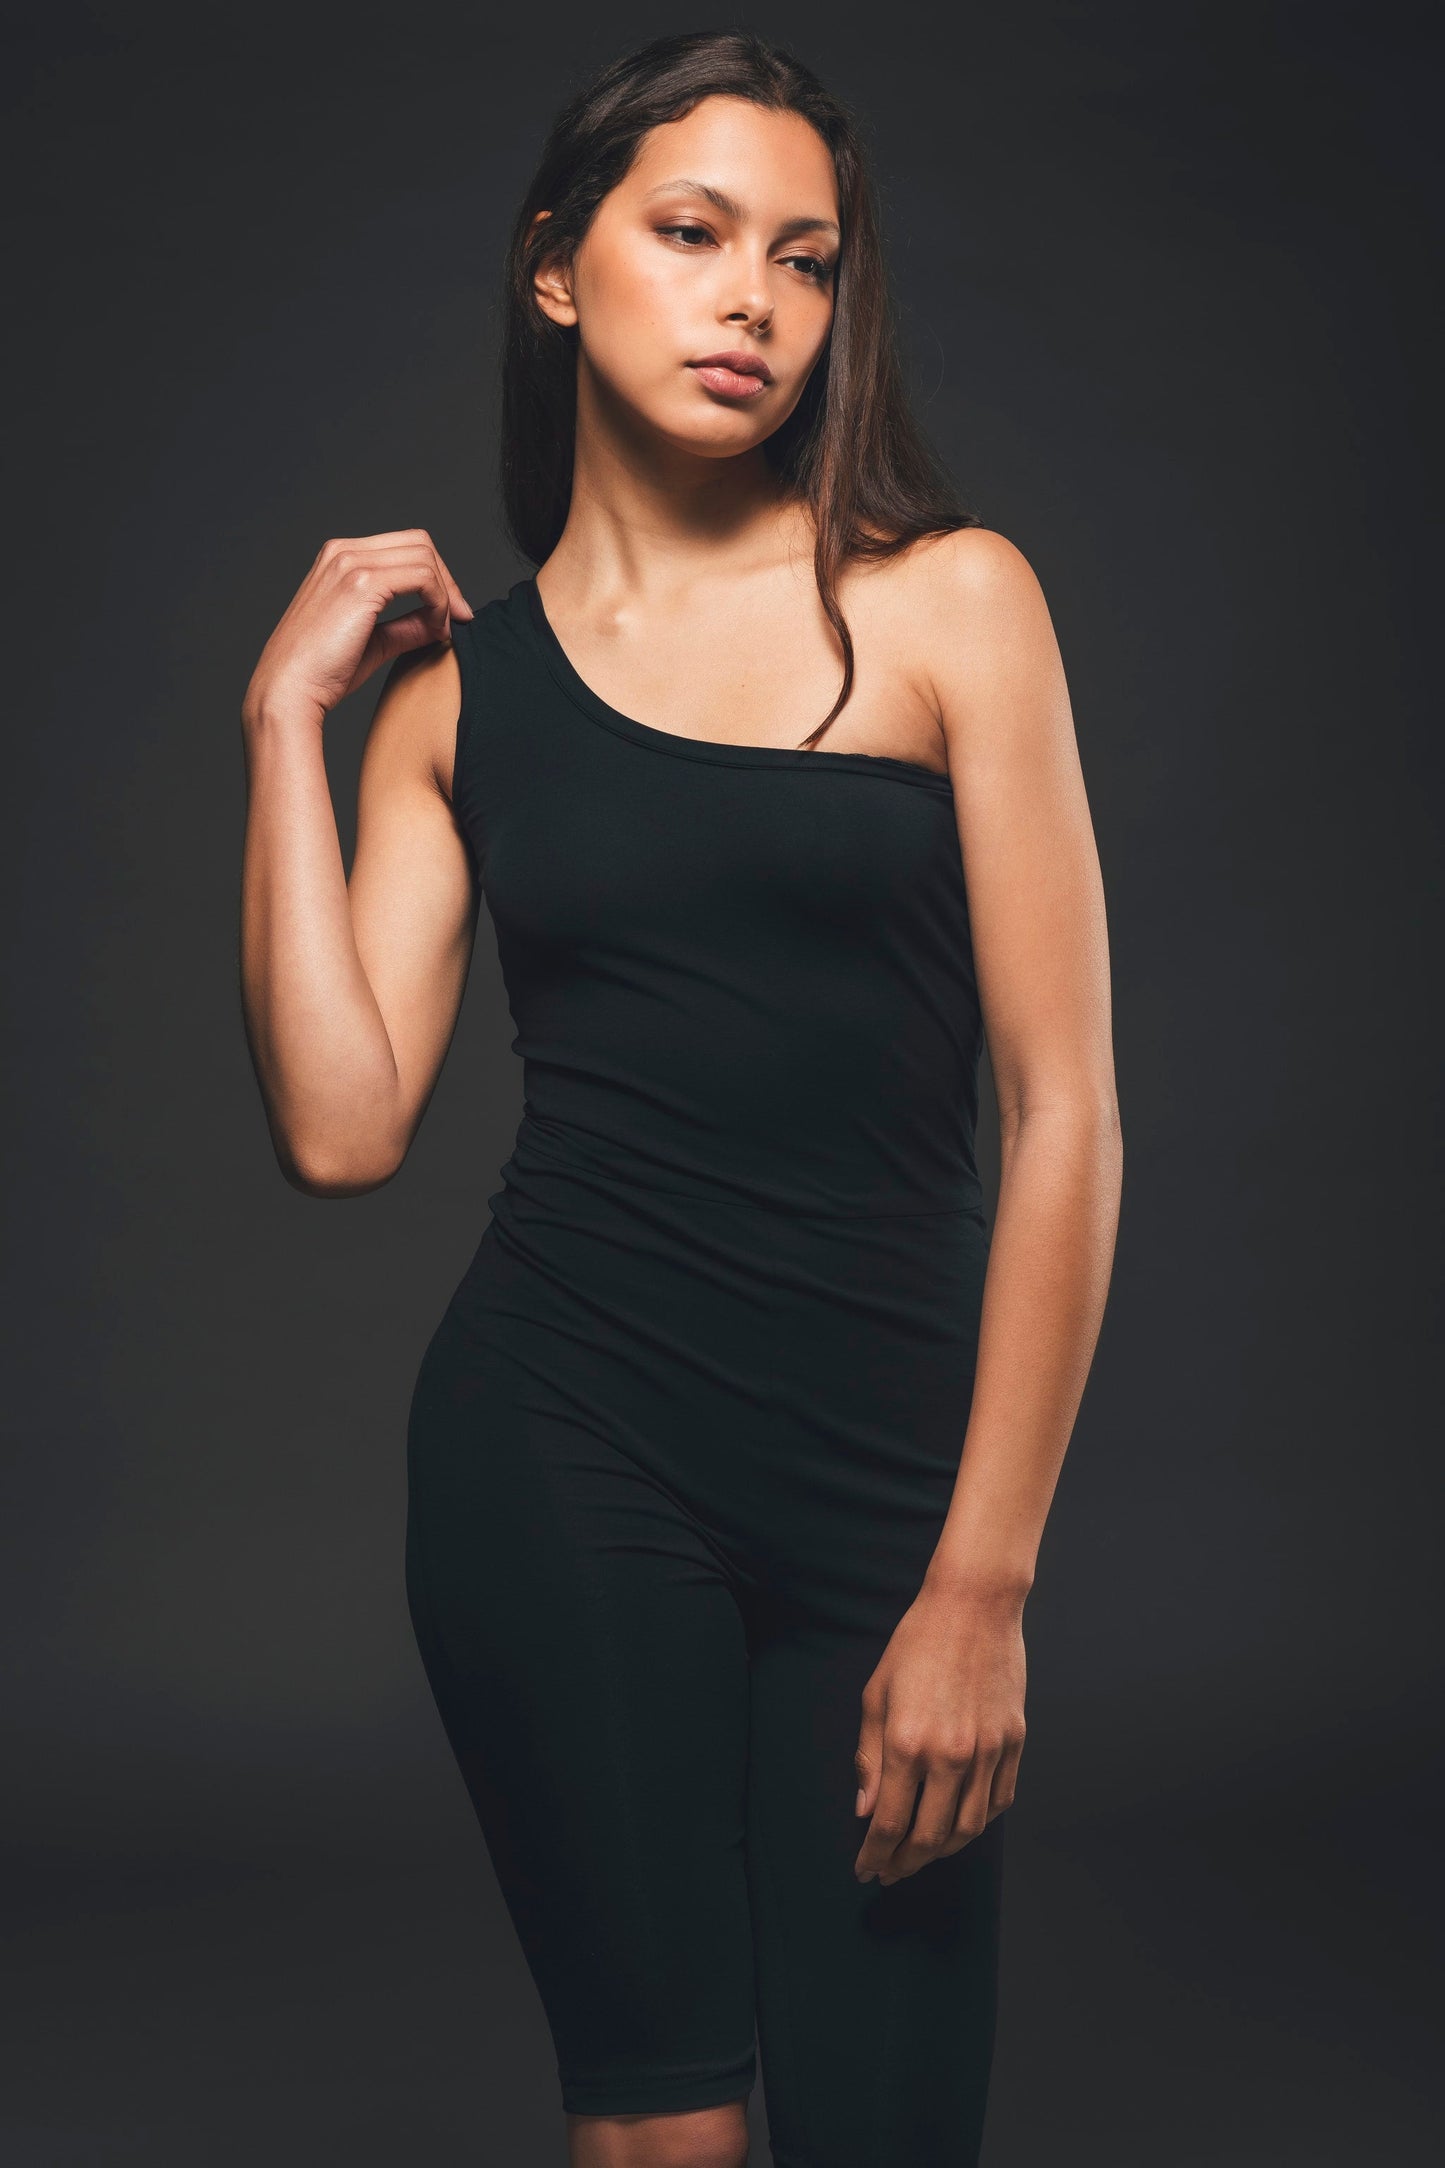 Image of black sustainable one shoulder jumpsuit made by Organique, a sustainable clothing brand.